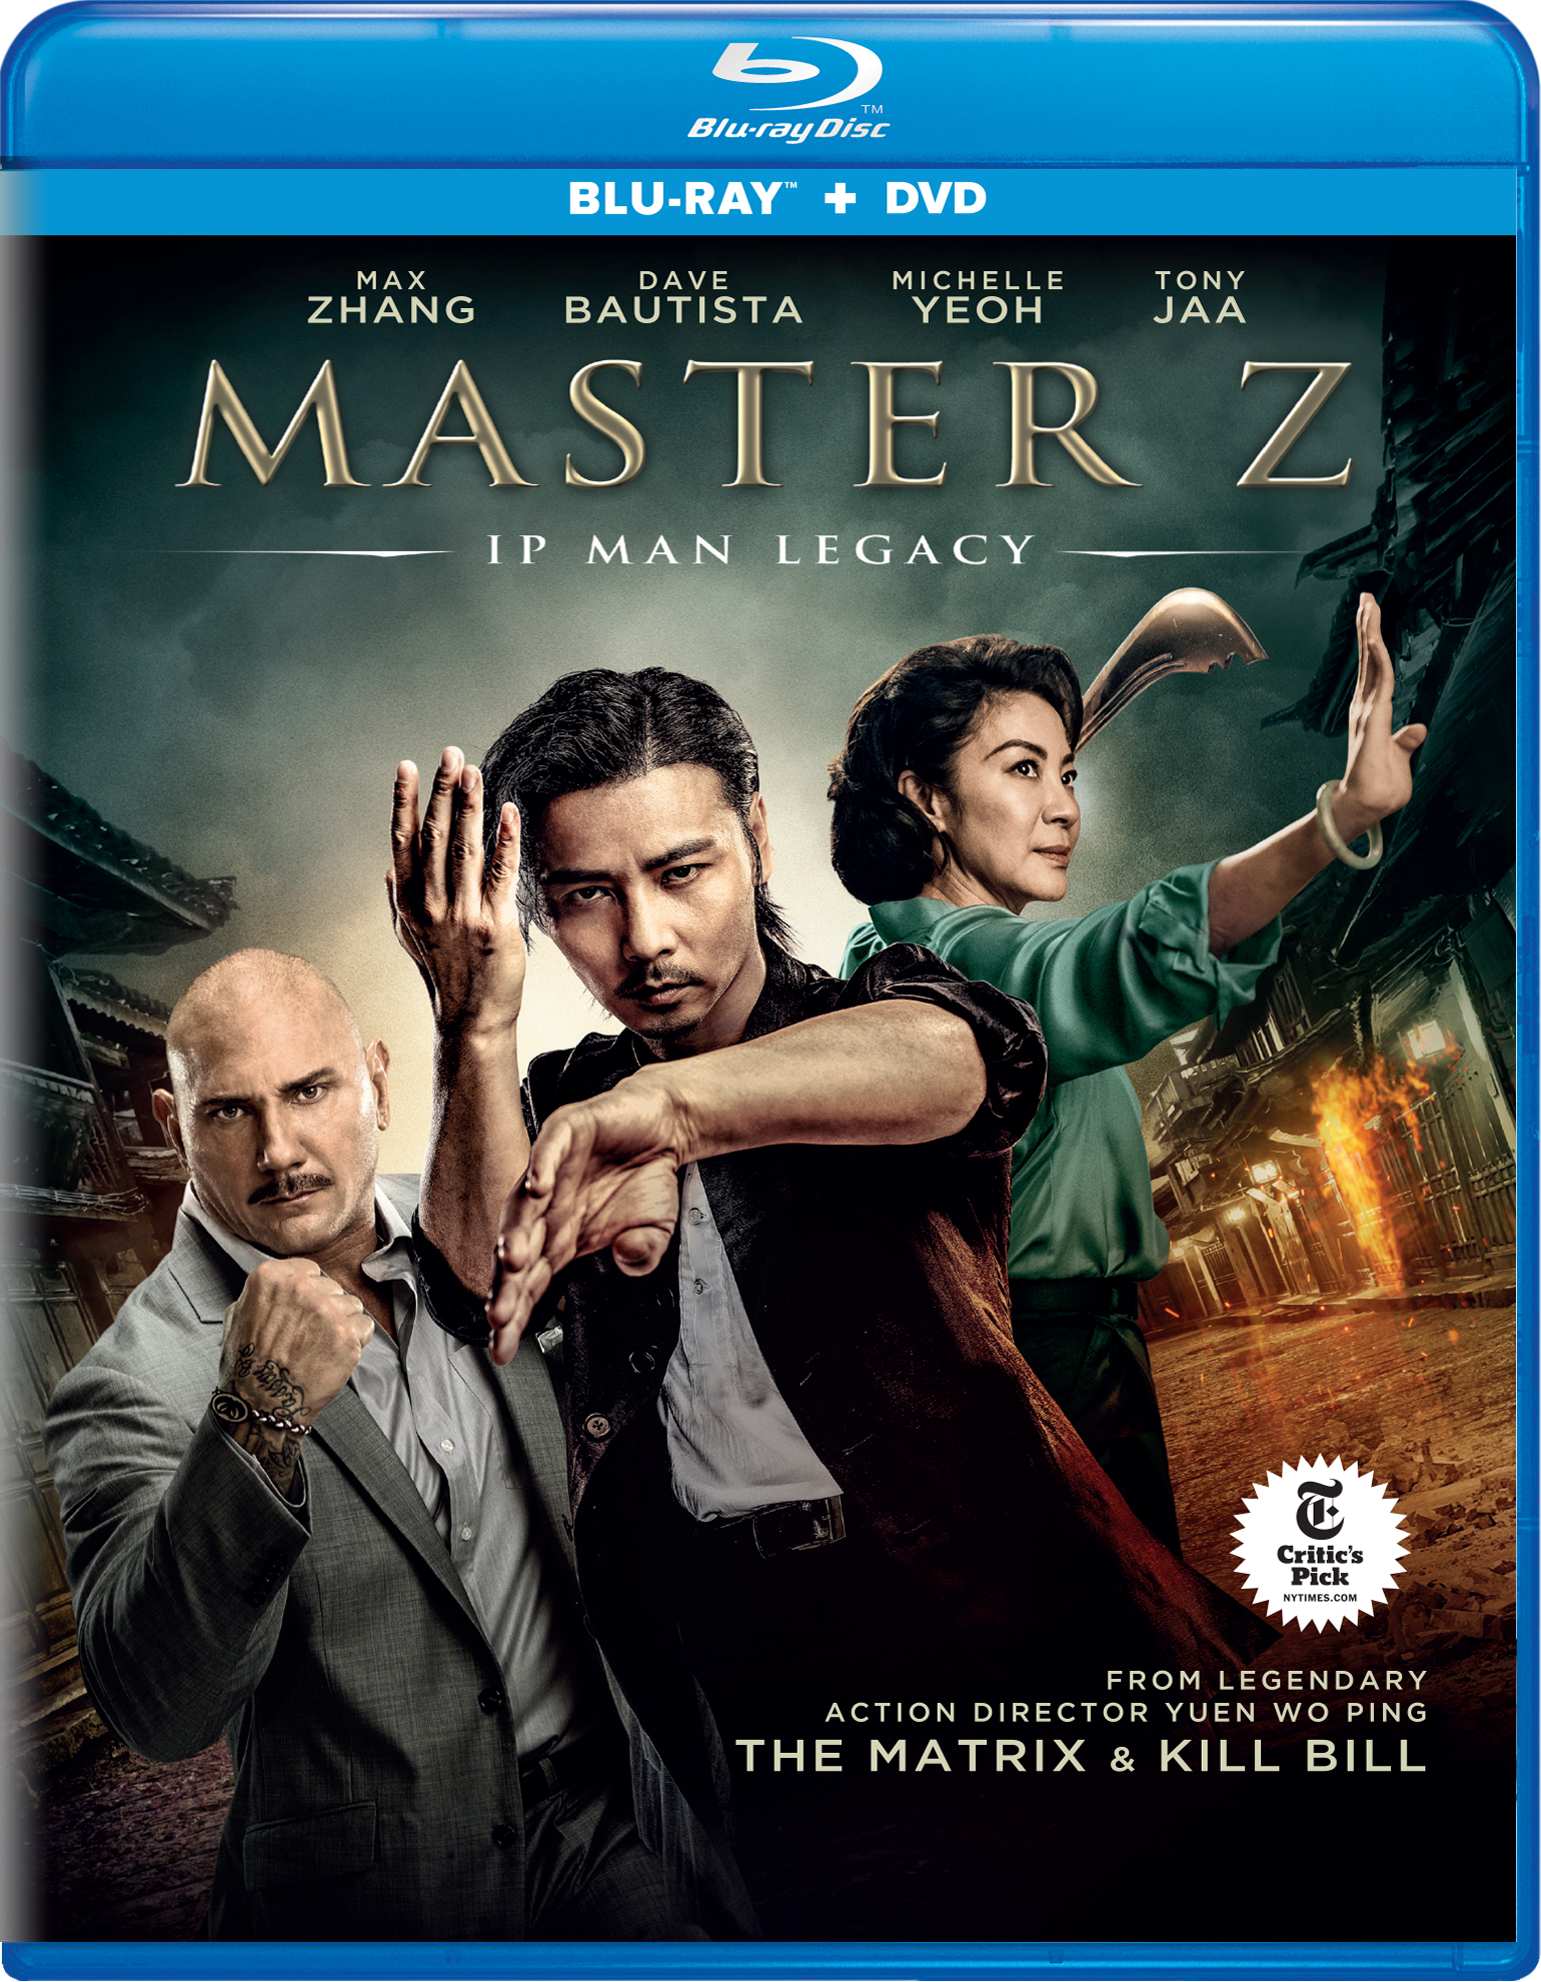 Master Z: Ip Man Legacy (with DVD) - Blu-ray [ 2019 ]  - Foreign Movies On Blu-ray - Movies On GRUV